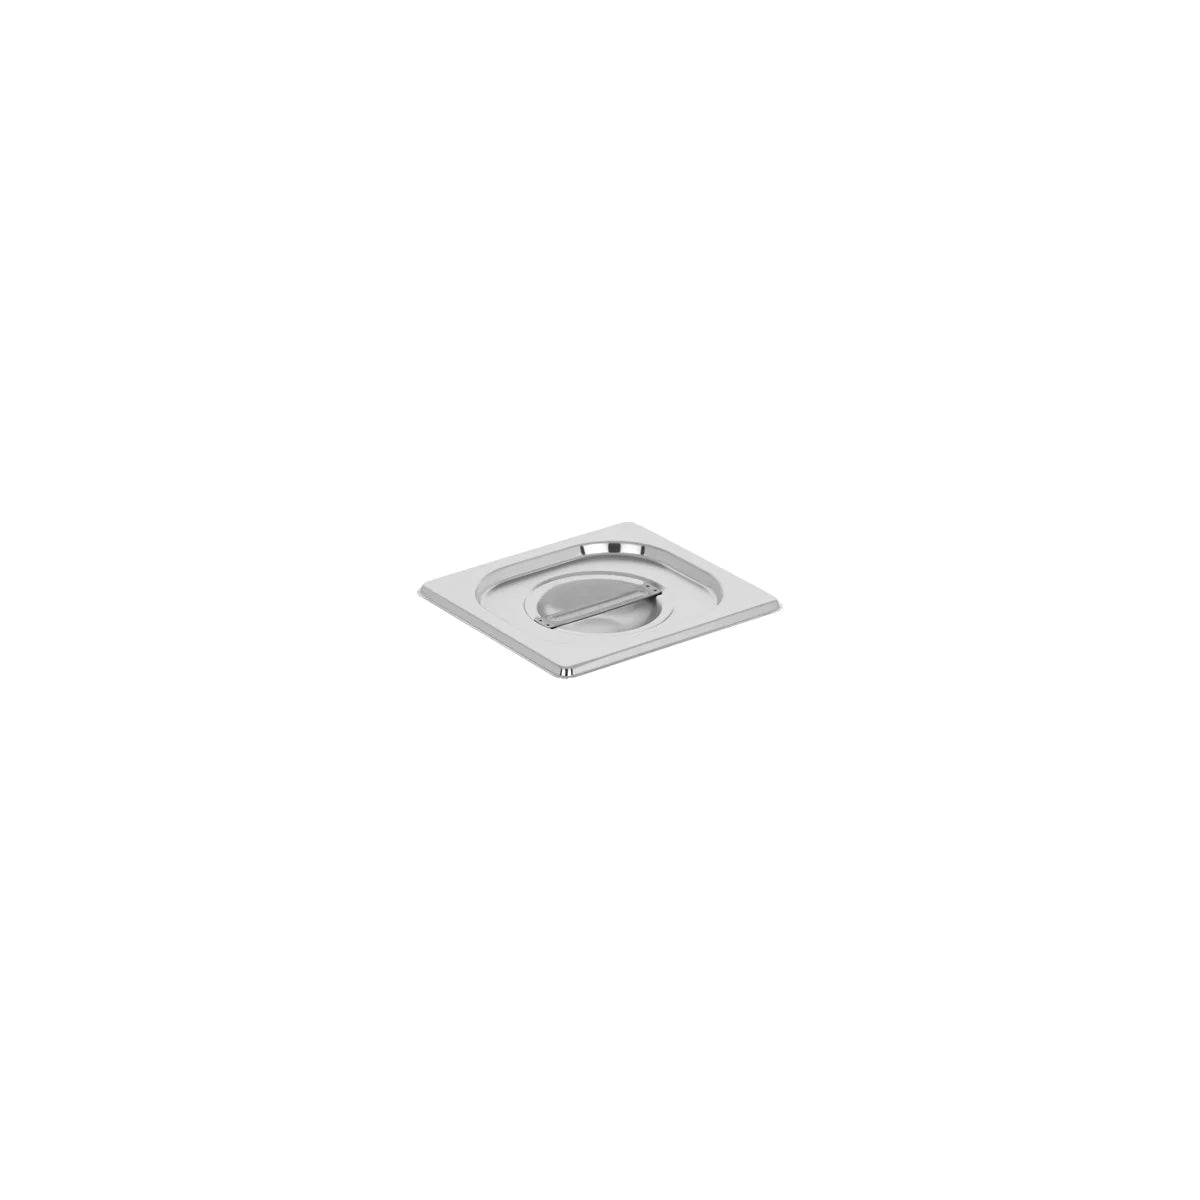 ANTI-JAM STEAM PAN COVER 1/6 SIZE